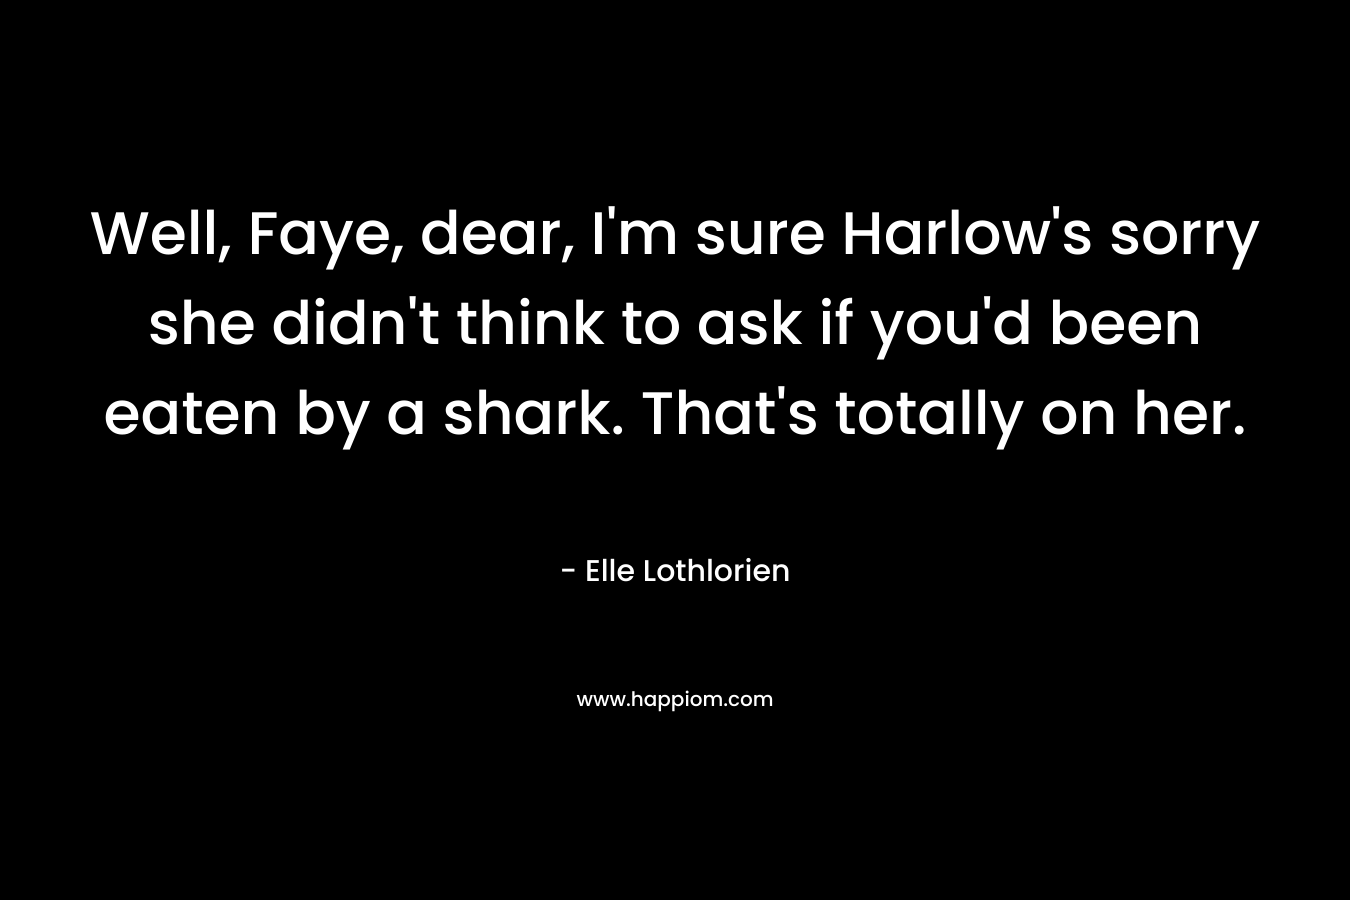 Well, Faye, dear, I'm sure Harlow's sorry she didn't think to ask if you'd been eaten by a shark. That's totally on her.